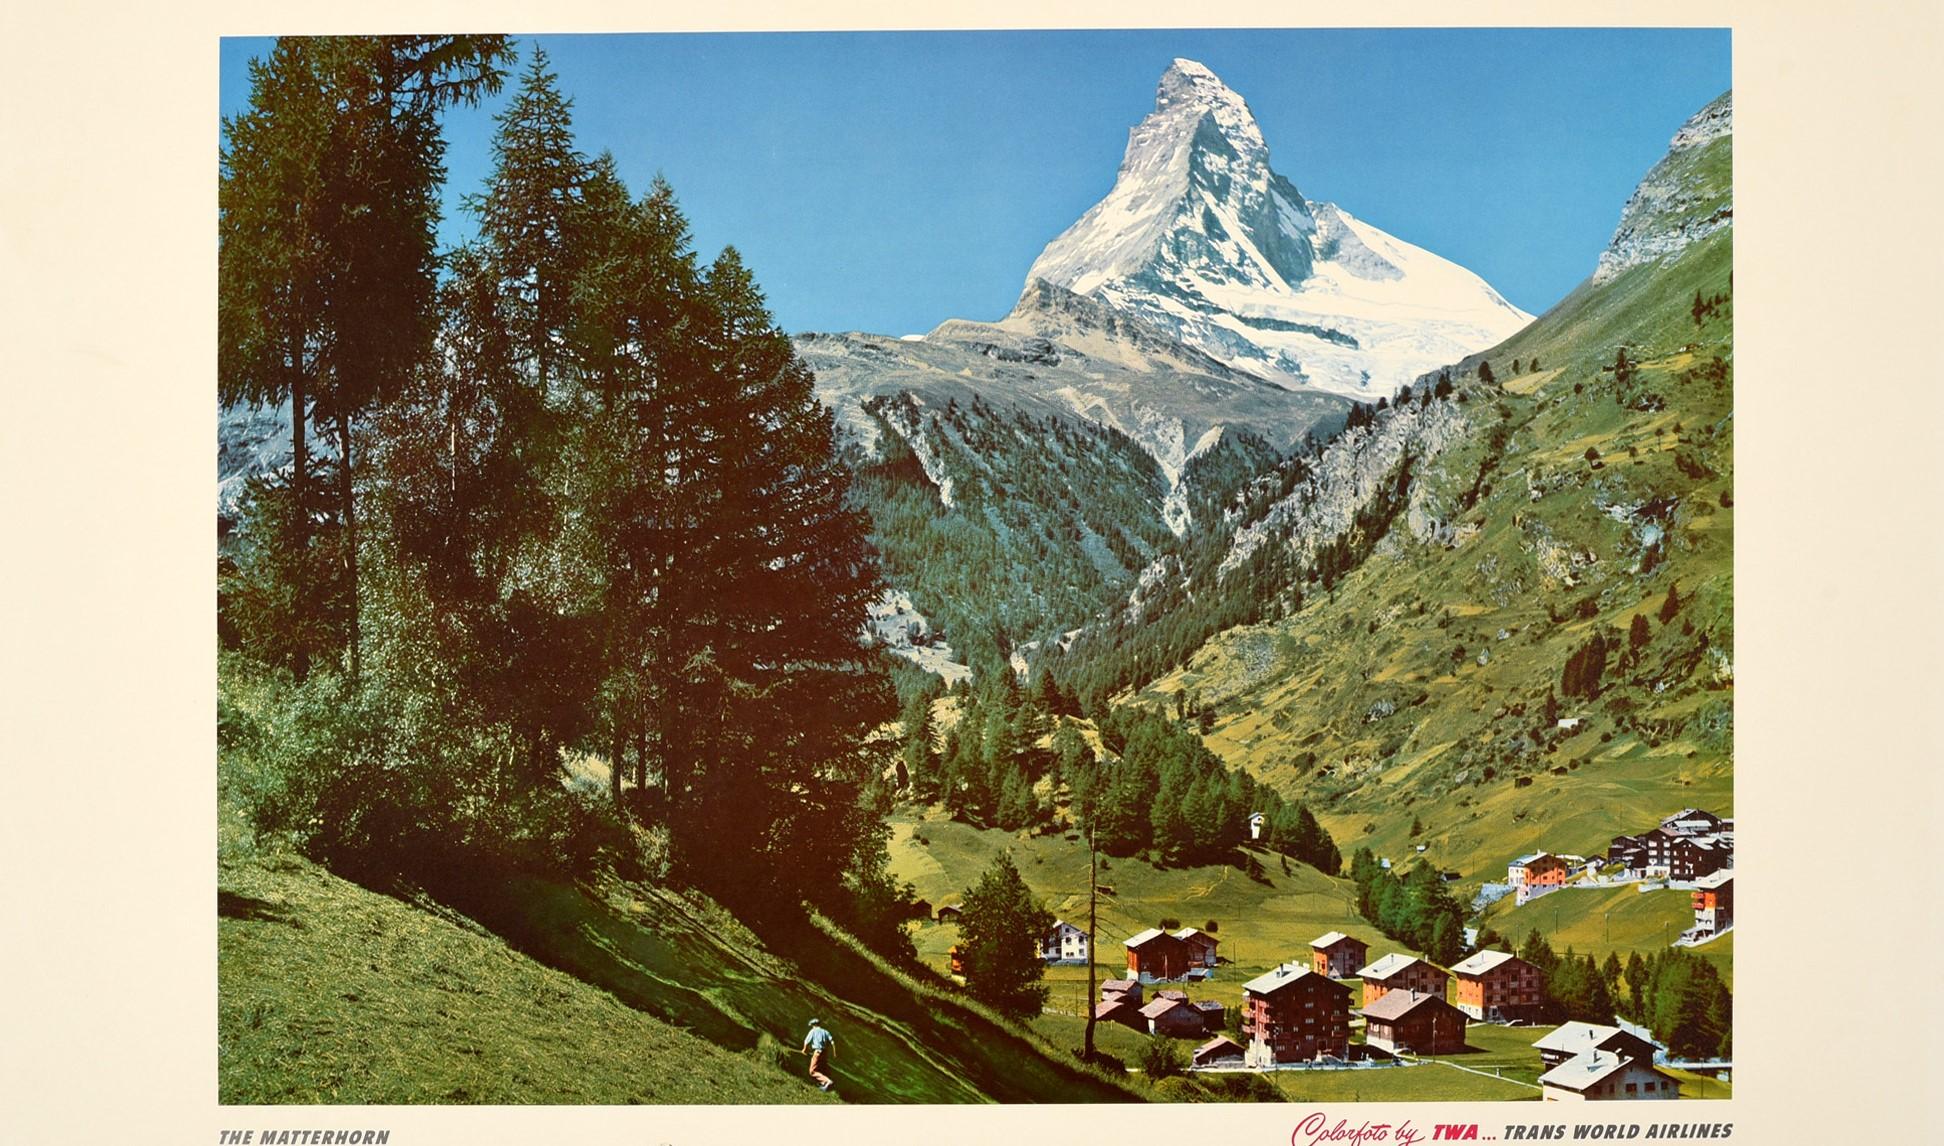 Original vintage airline travel poster - Along the way of TWA... Switzerland The Matterhorn - featuring a photograph of trees on a green hill with a small town nestled in the valley overlooked by the snow topped Matterhorn mountain in the distance